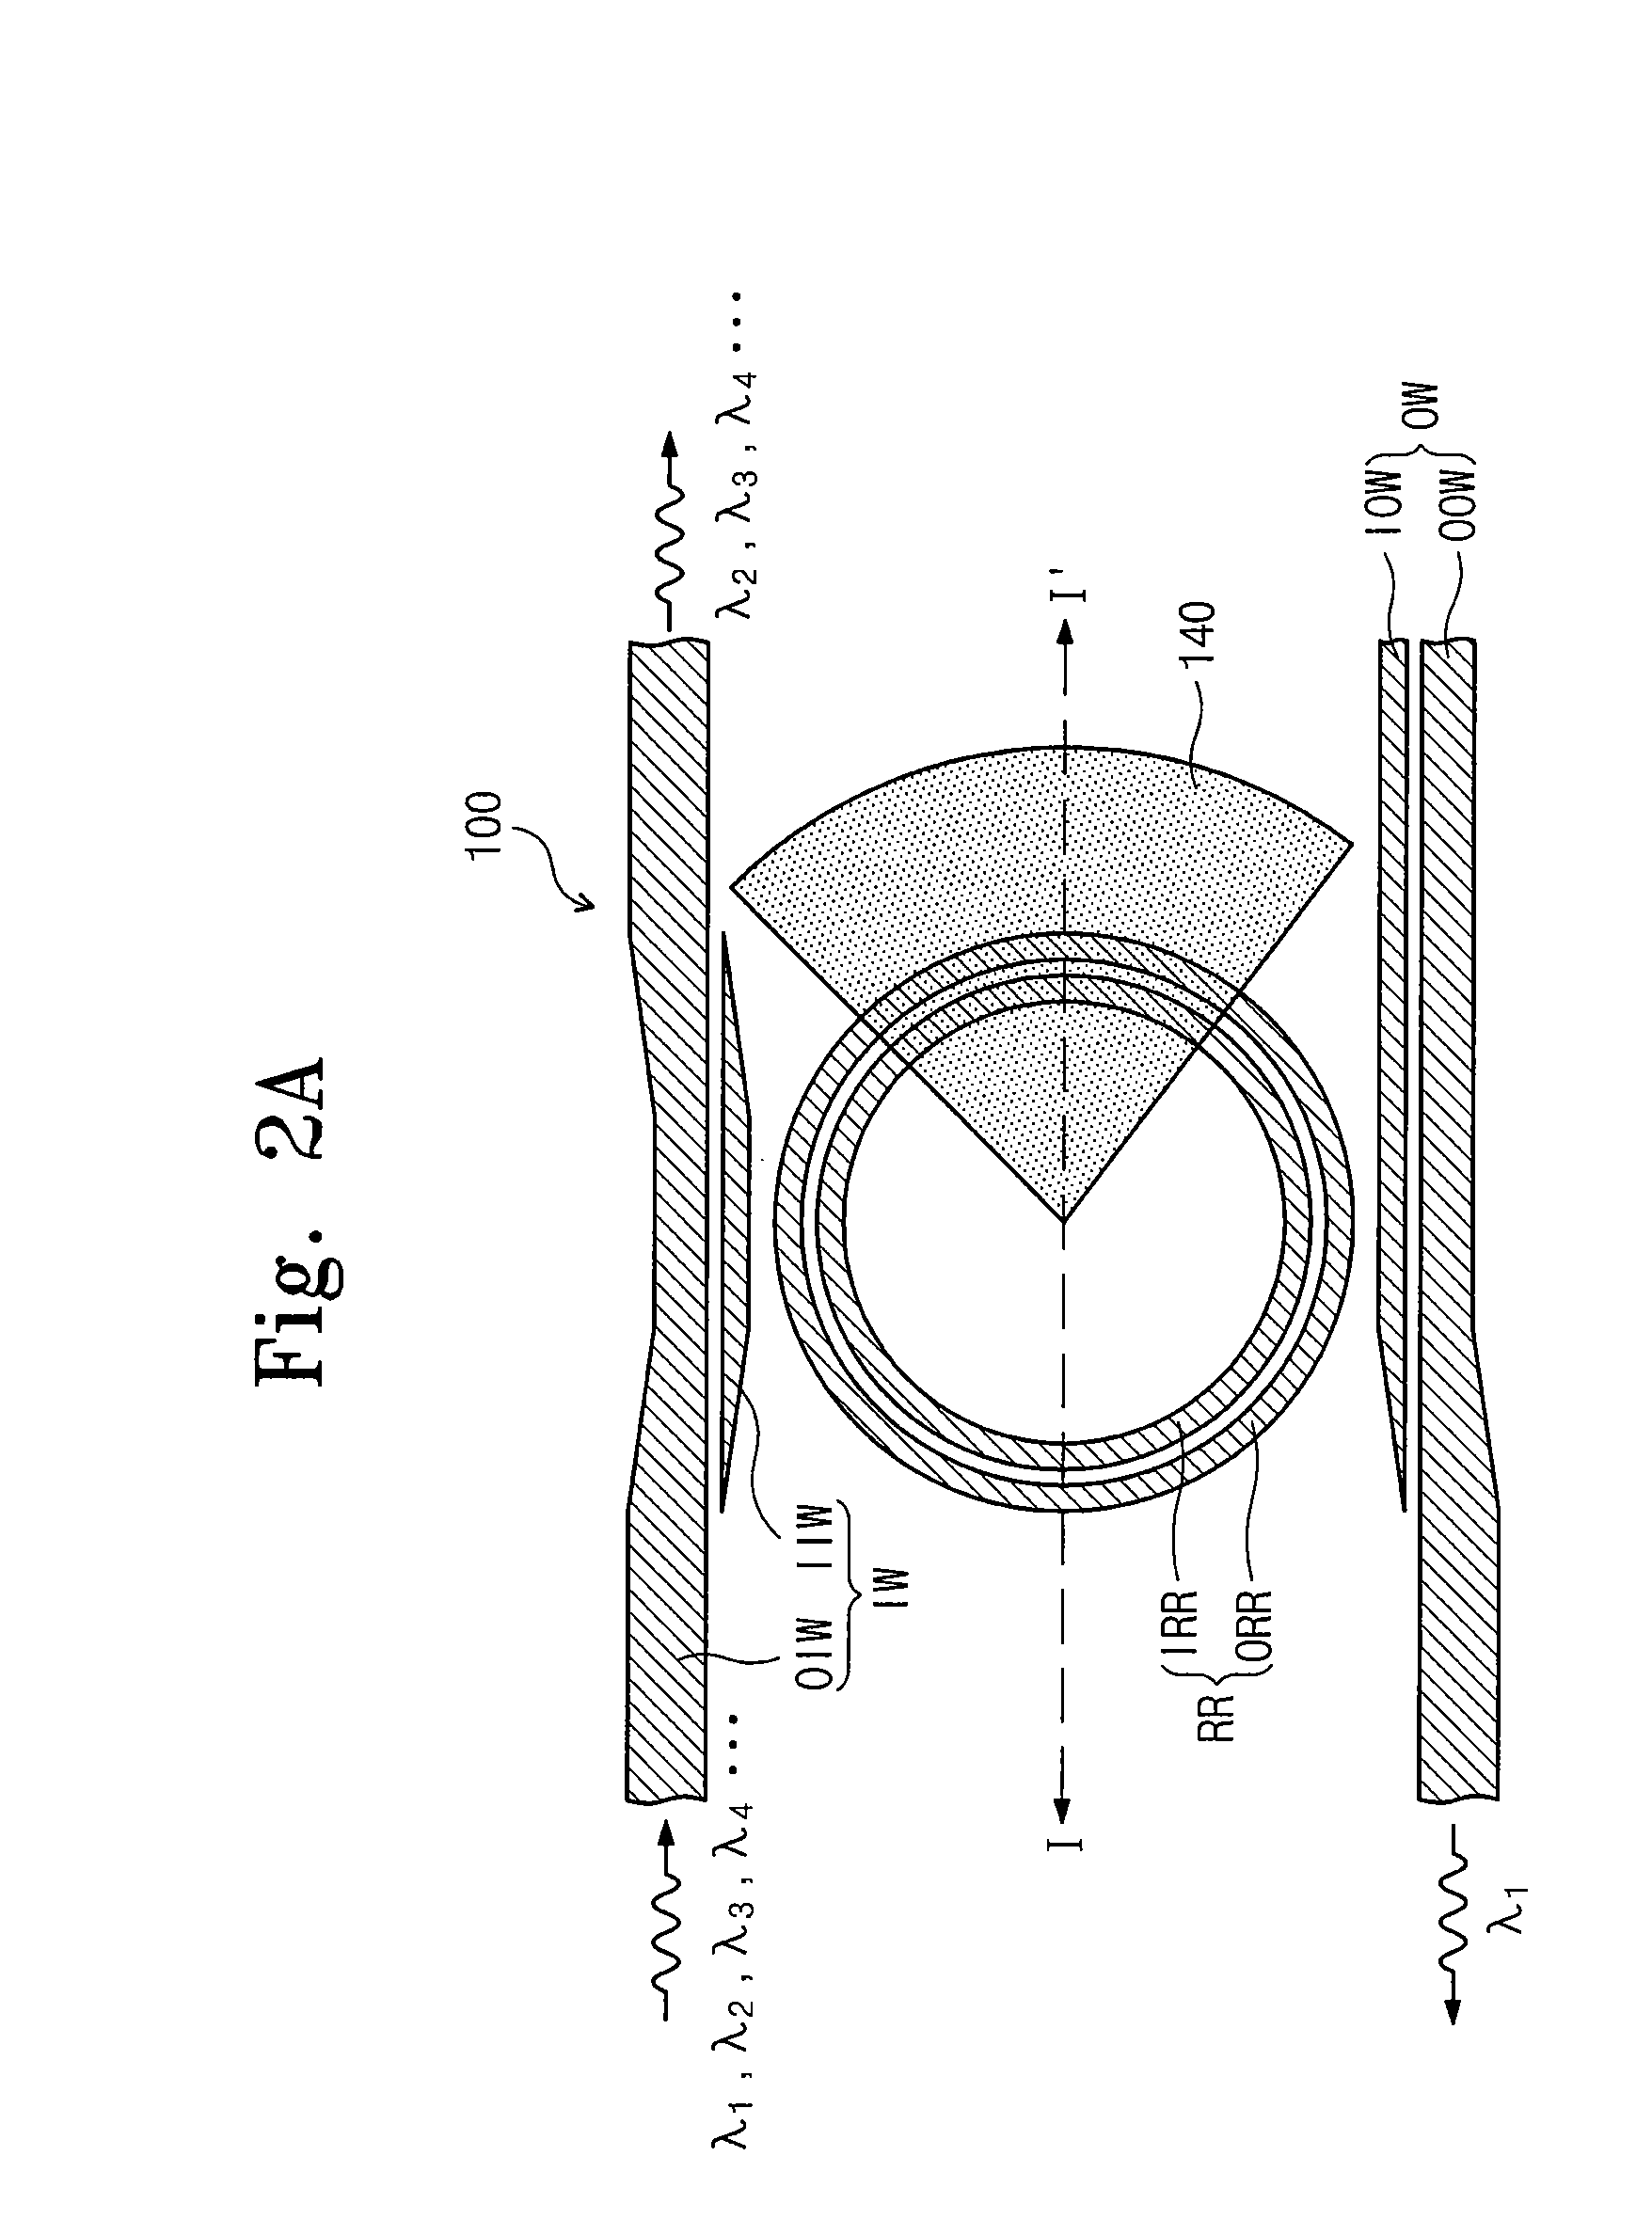 Waveguide structure